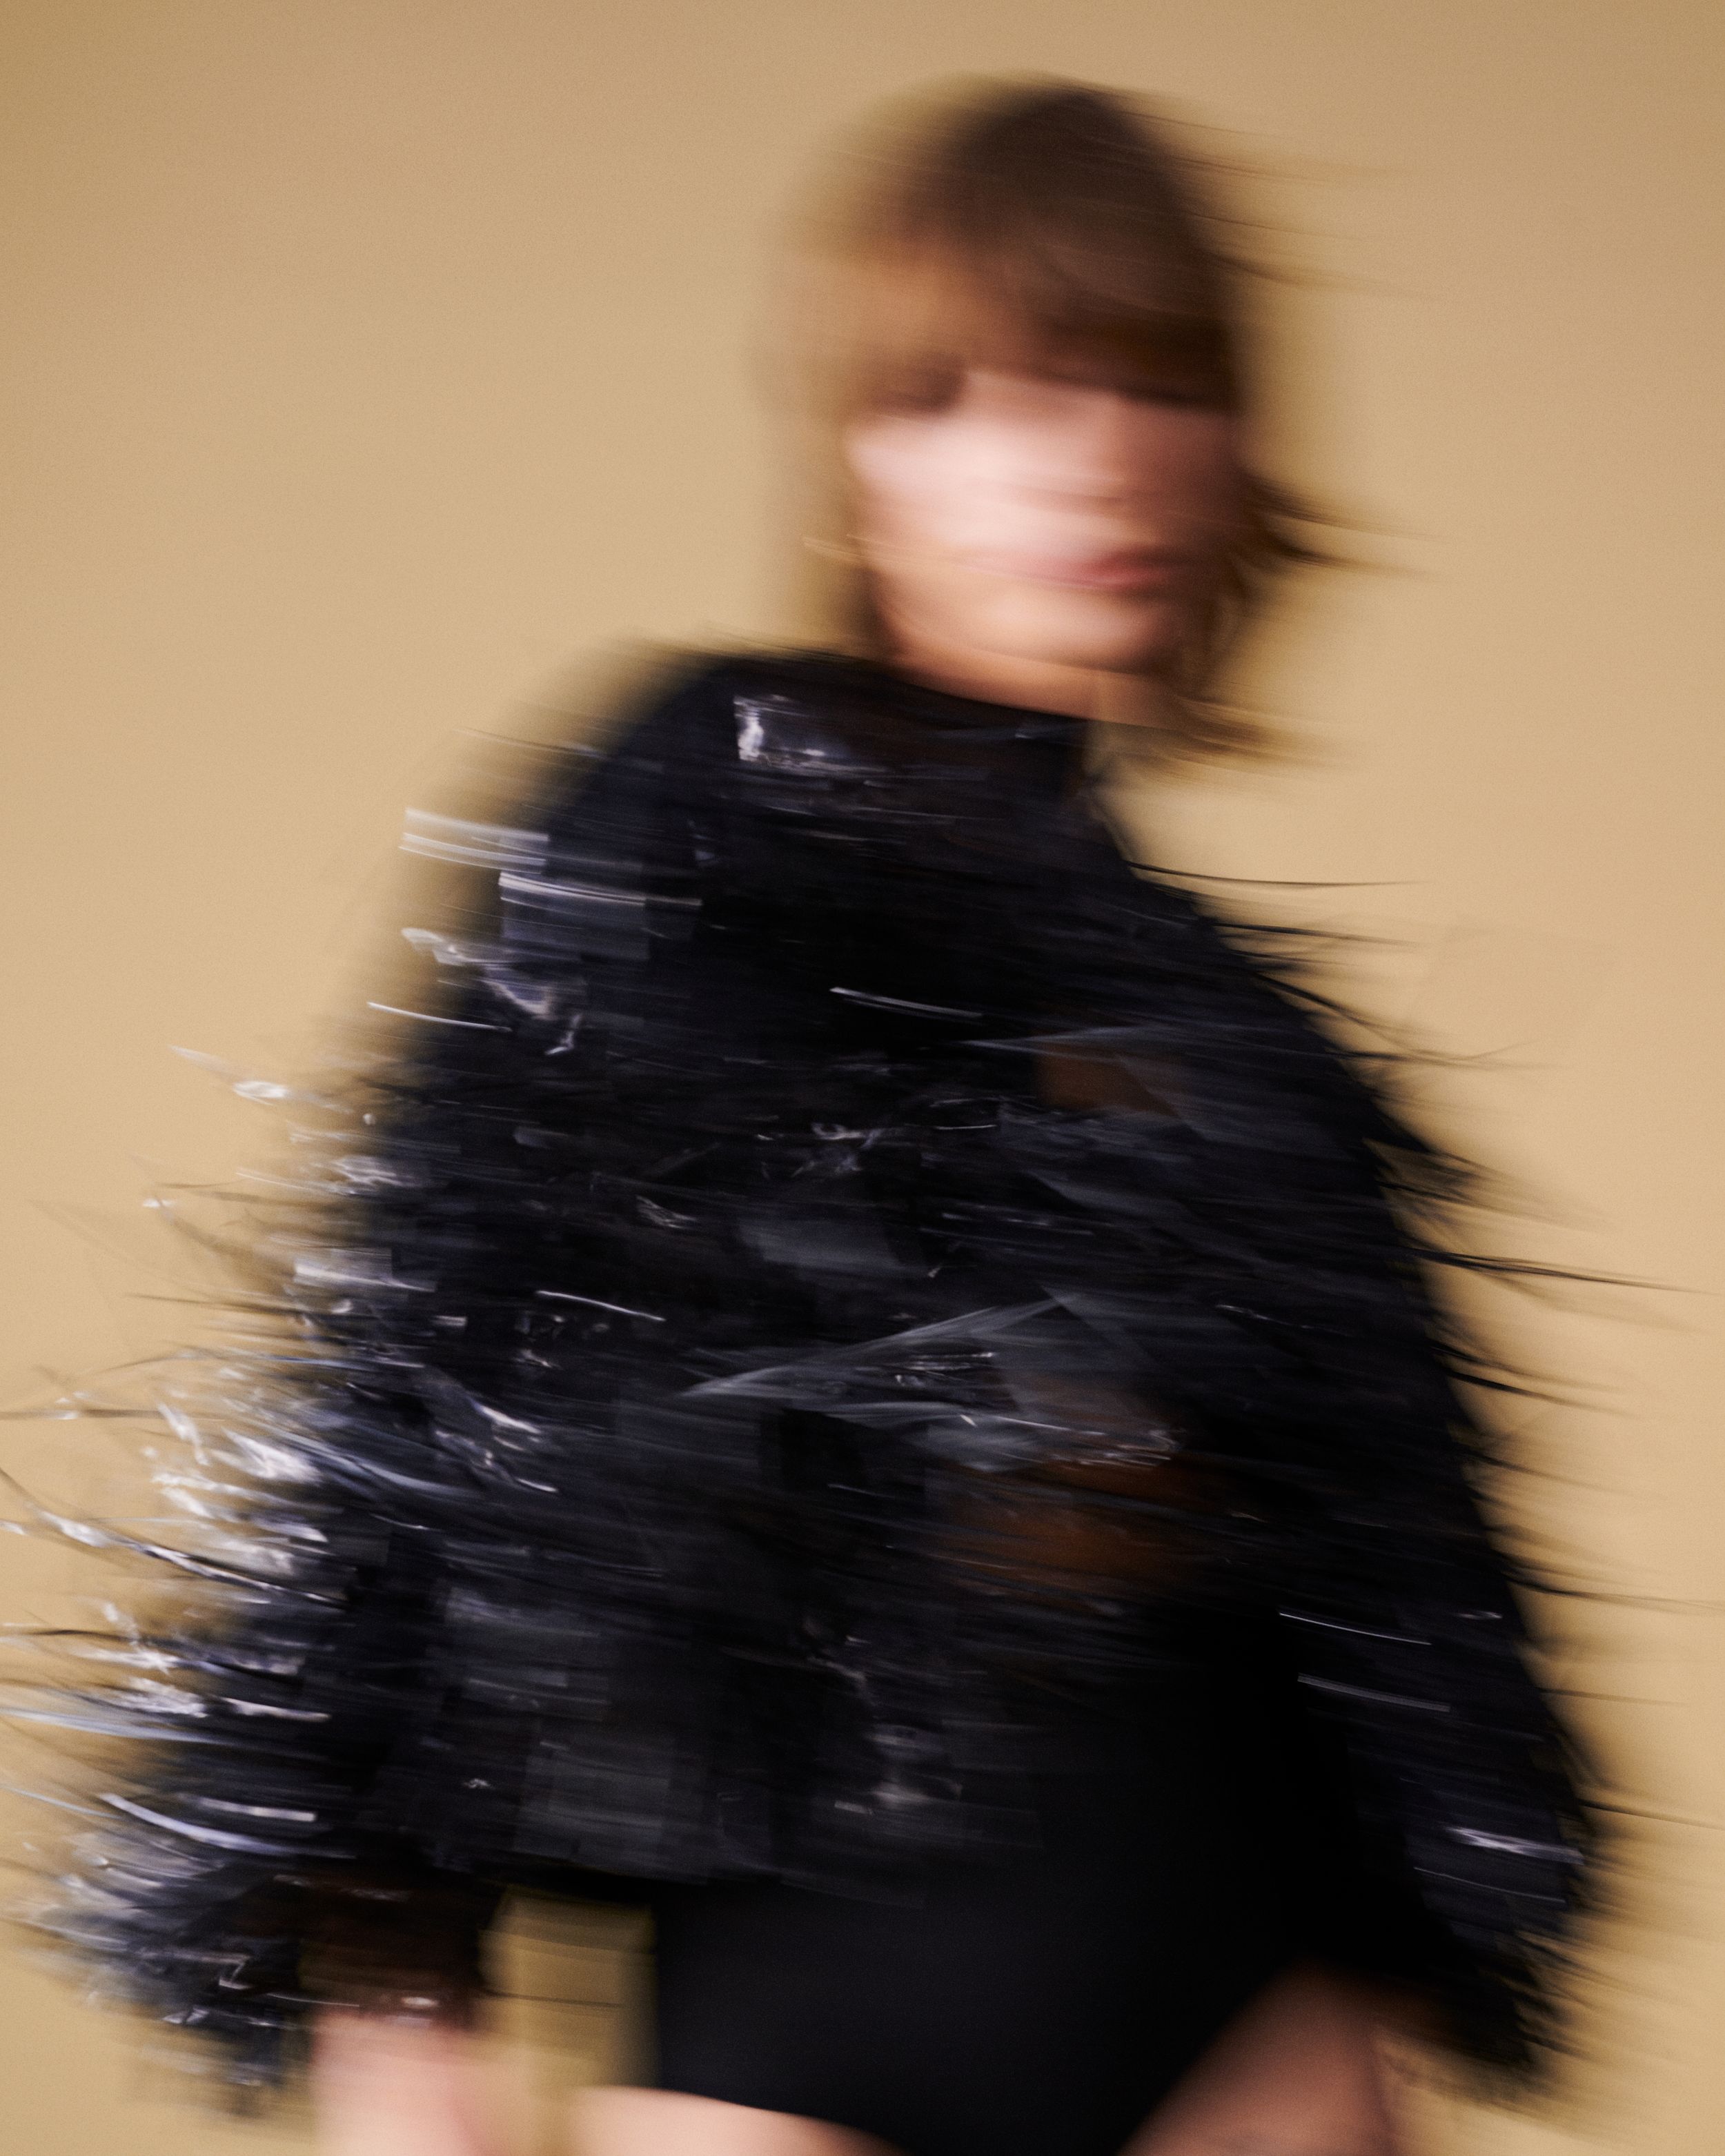 Blurred image of woman moving in a black tinsel fringed jacket